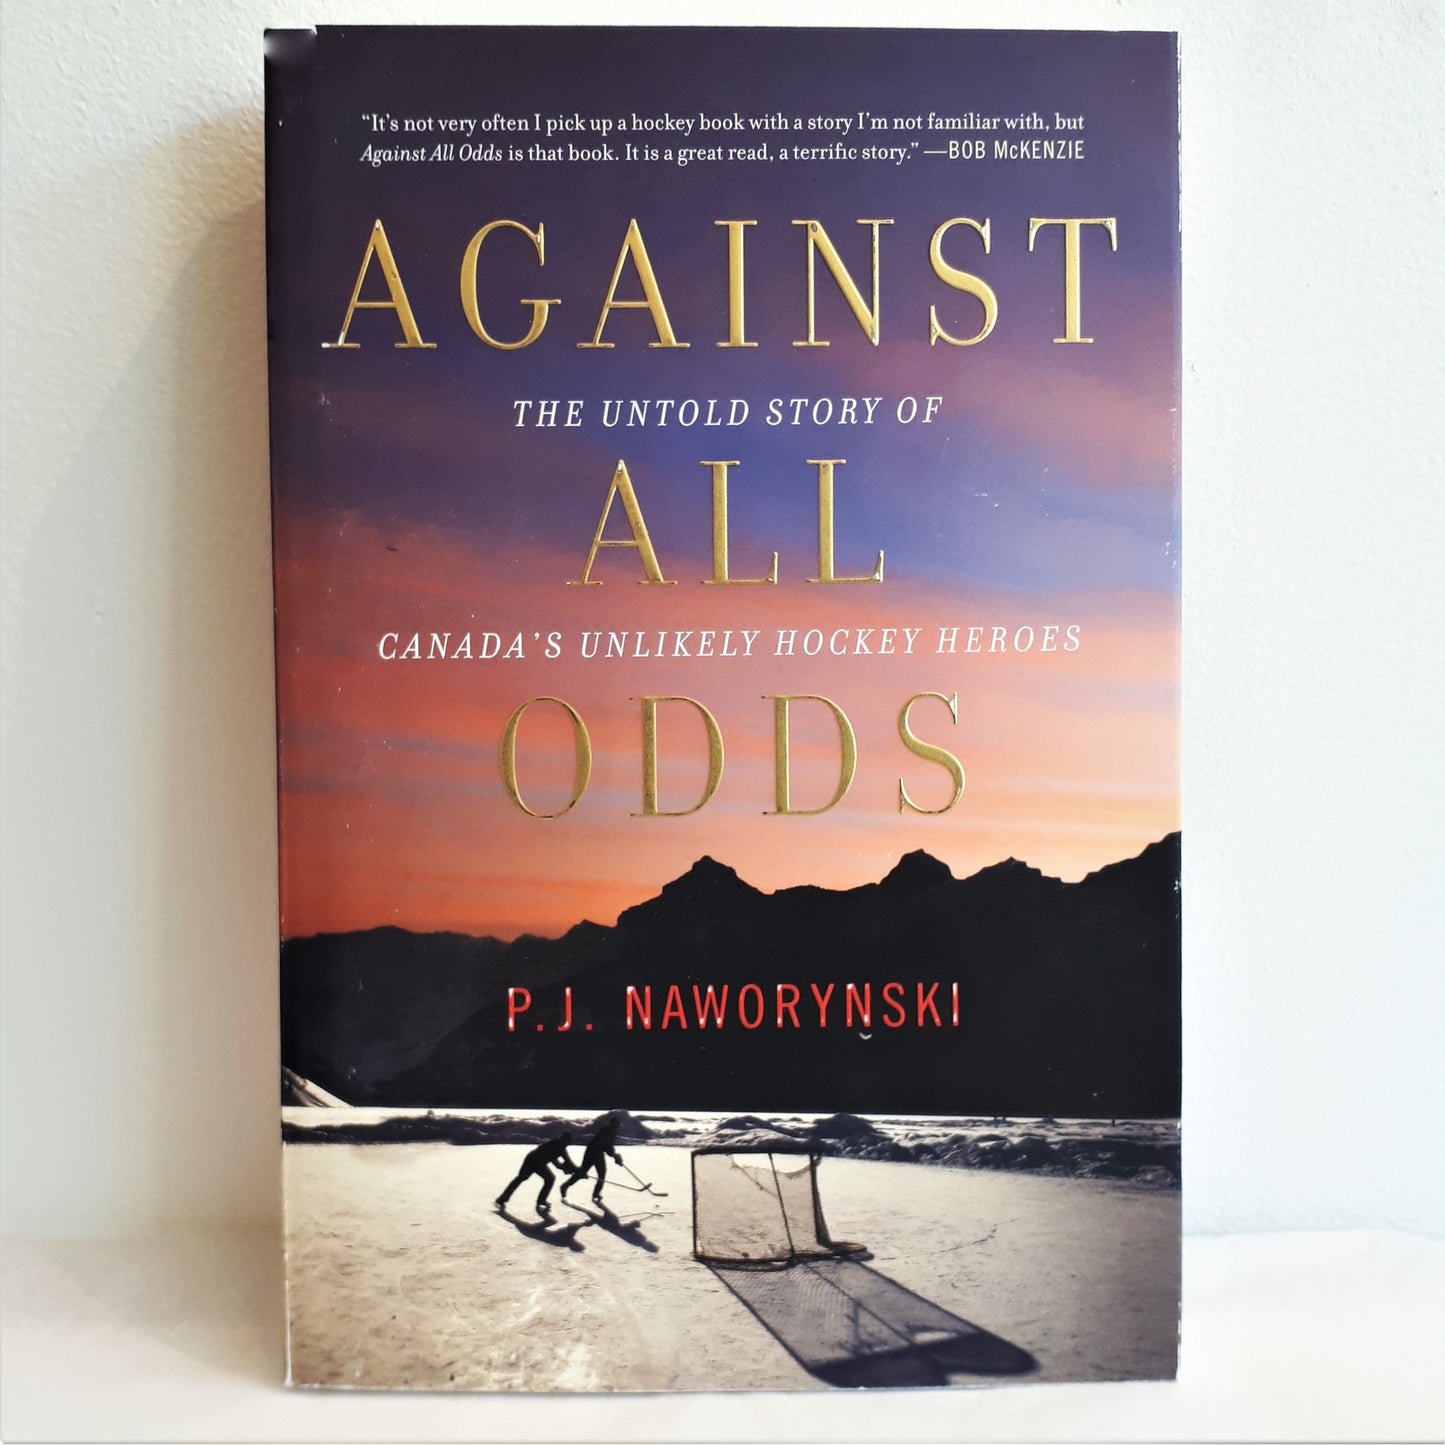 Against All Odds: The Untold Story of Canada's Unlikely Hockey Heroes by P.J. Naworynski